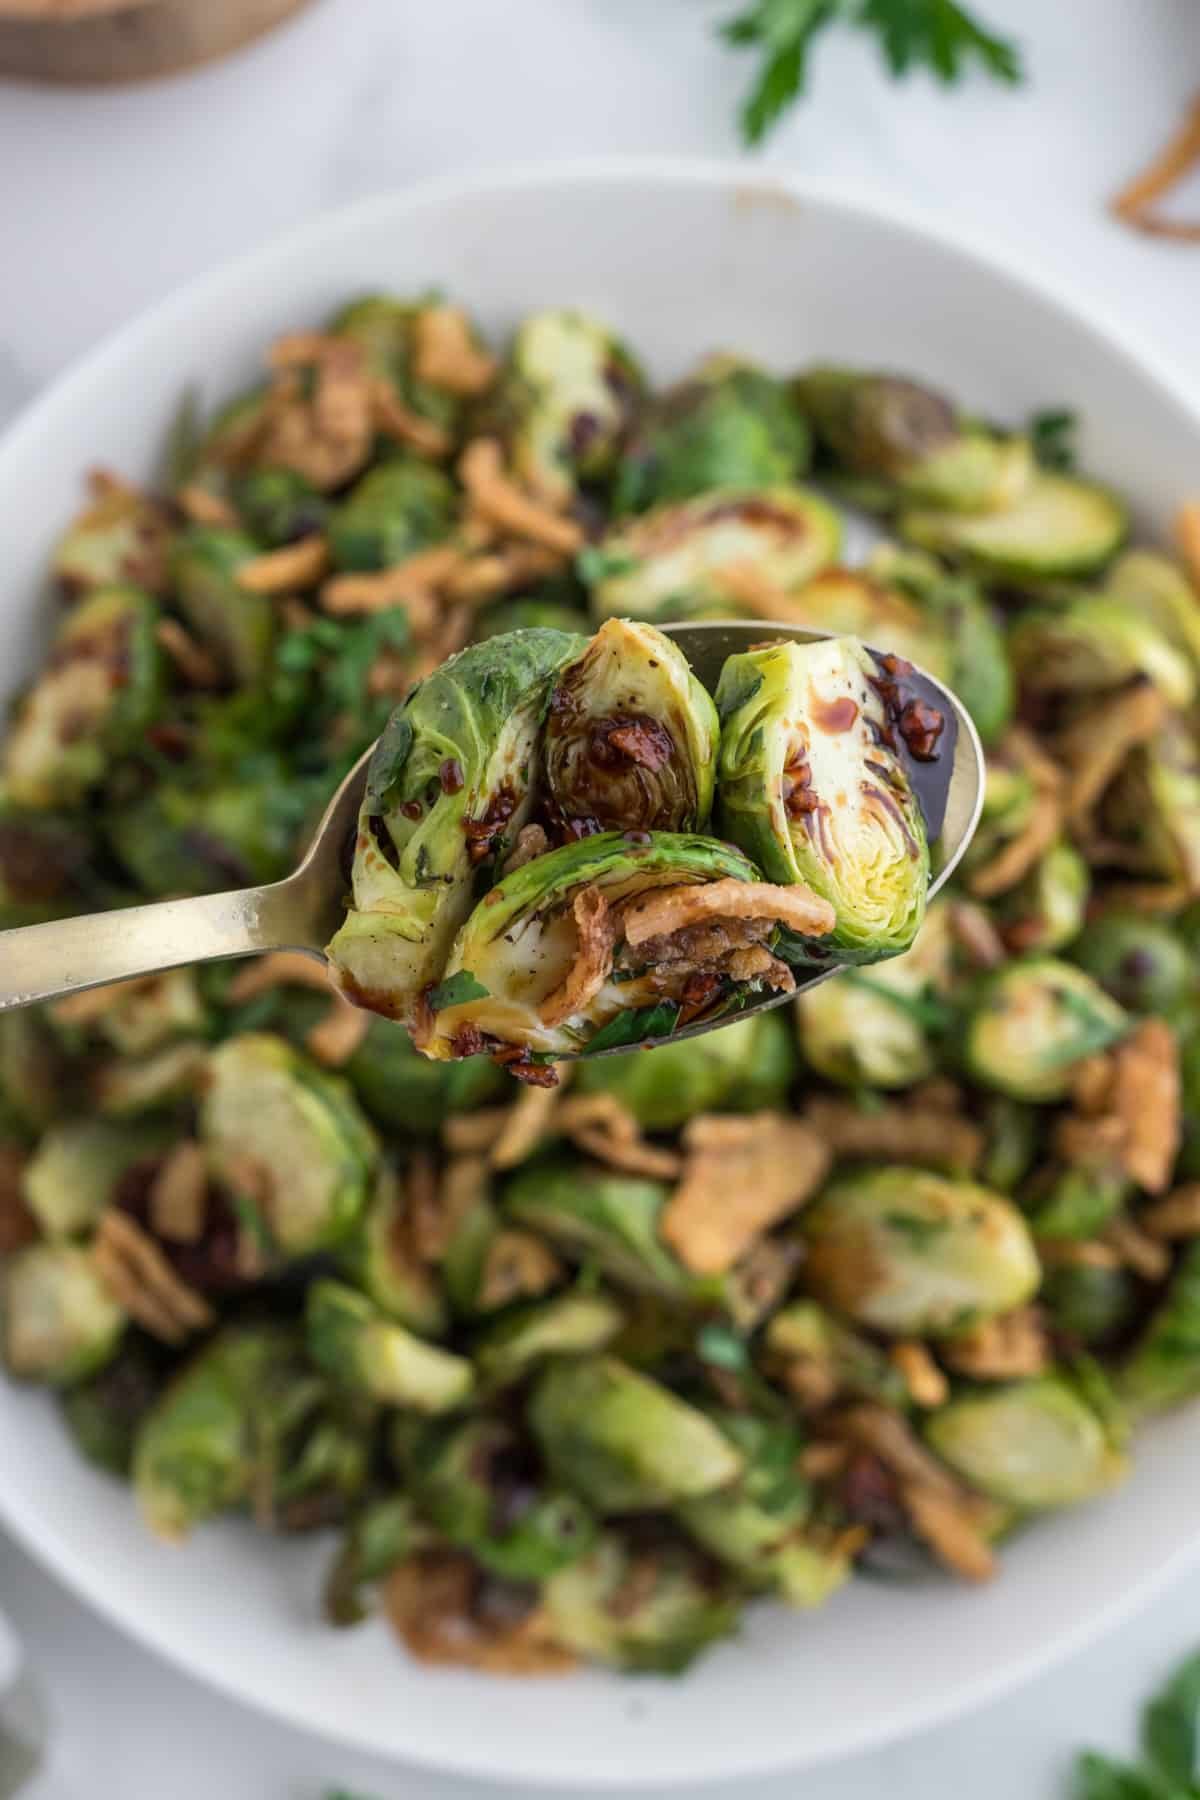 Lifting a spoon full of crispy brussels sprouts from a platter.